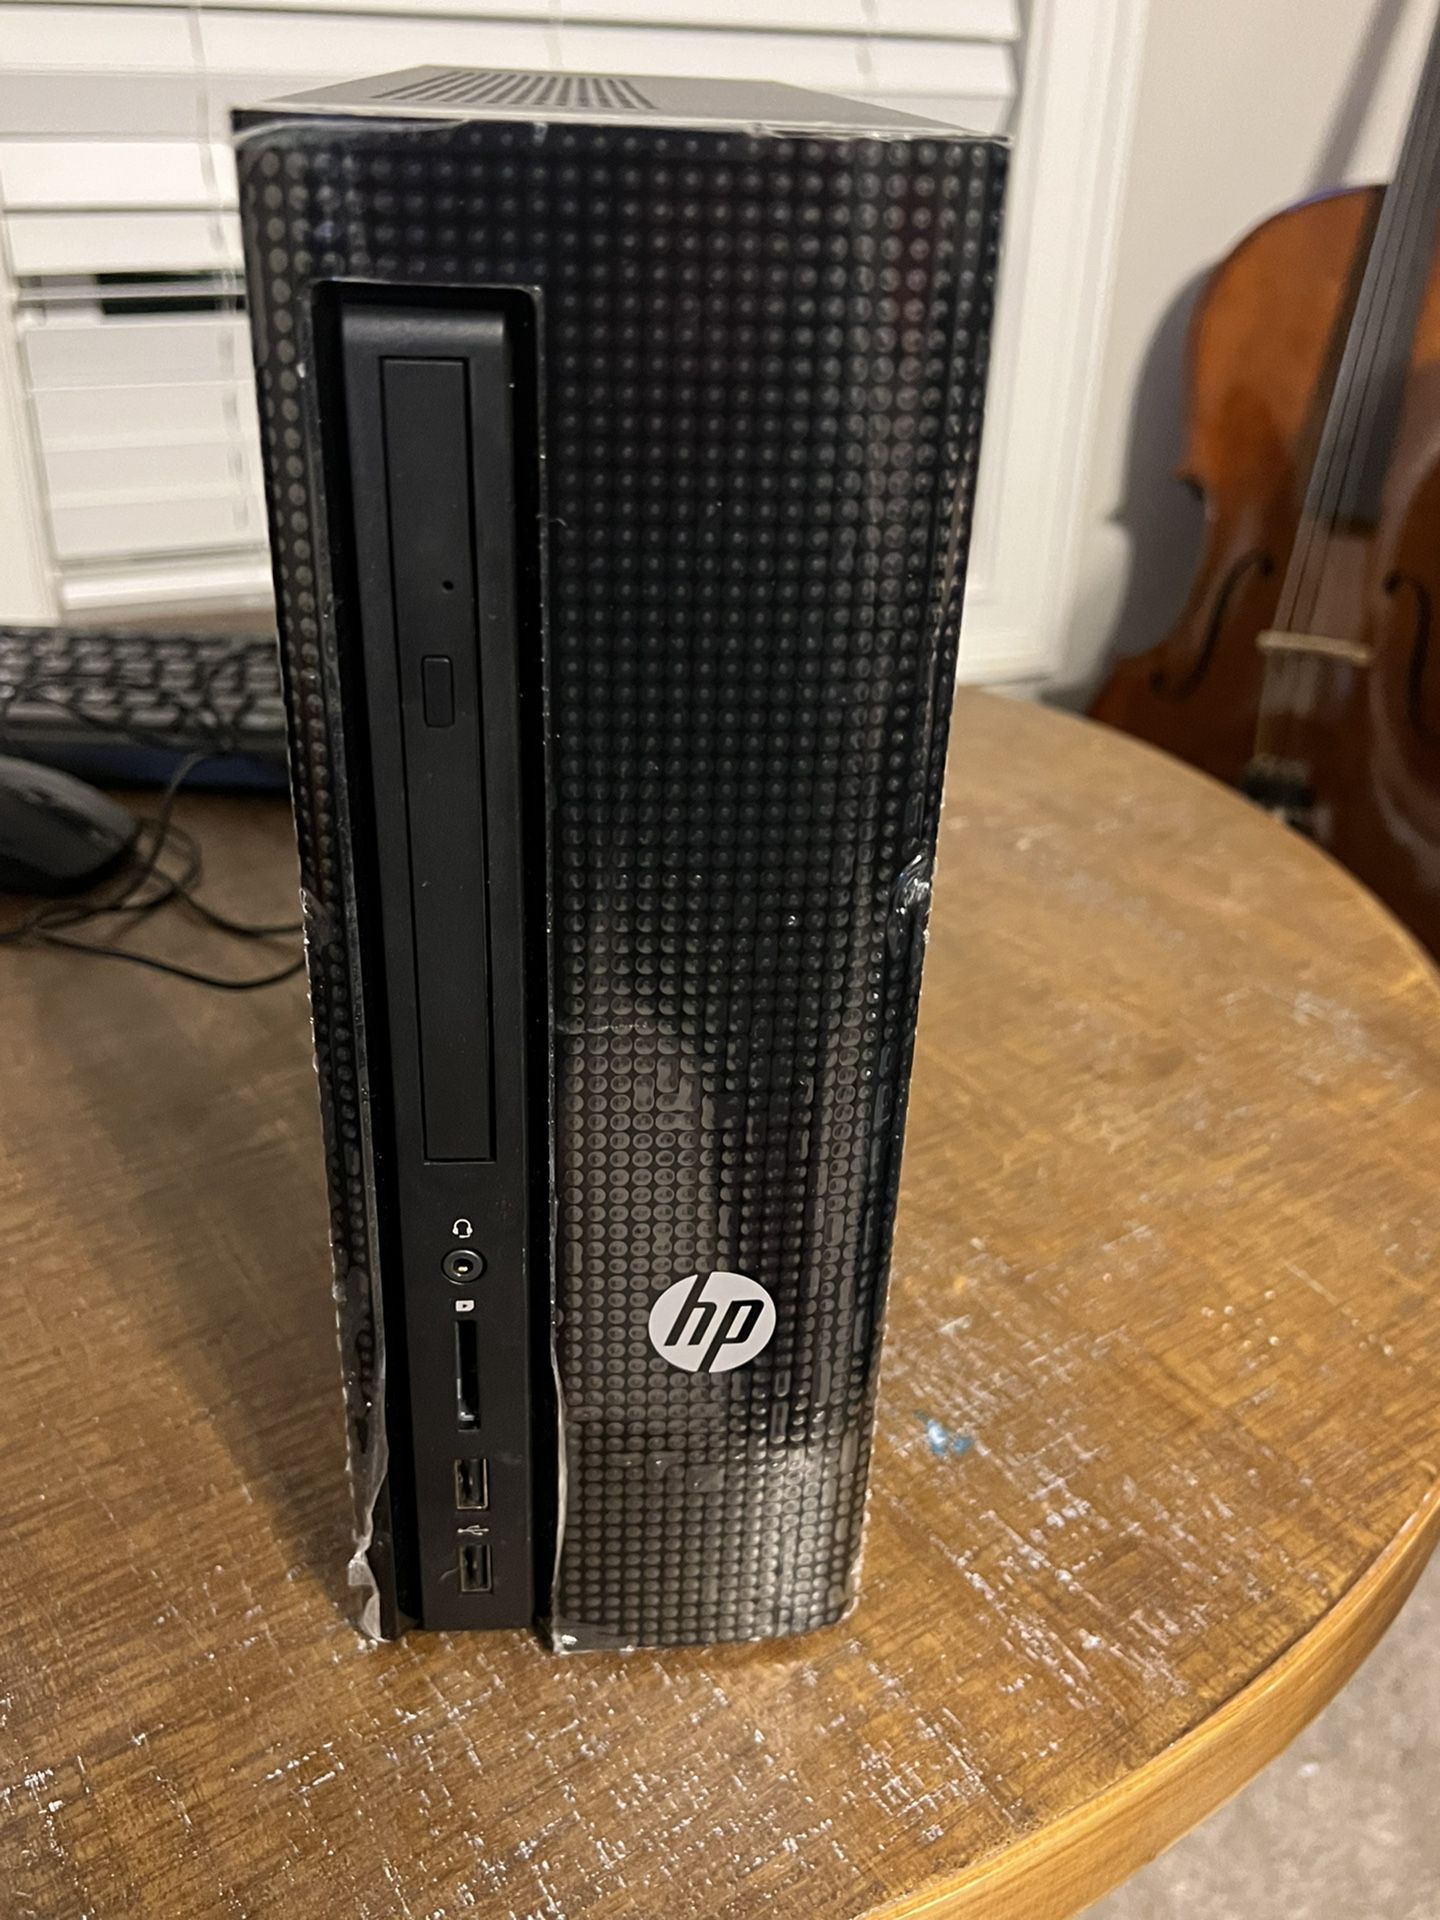 HP BlackComputer Desktop With Keyboard And Mouse